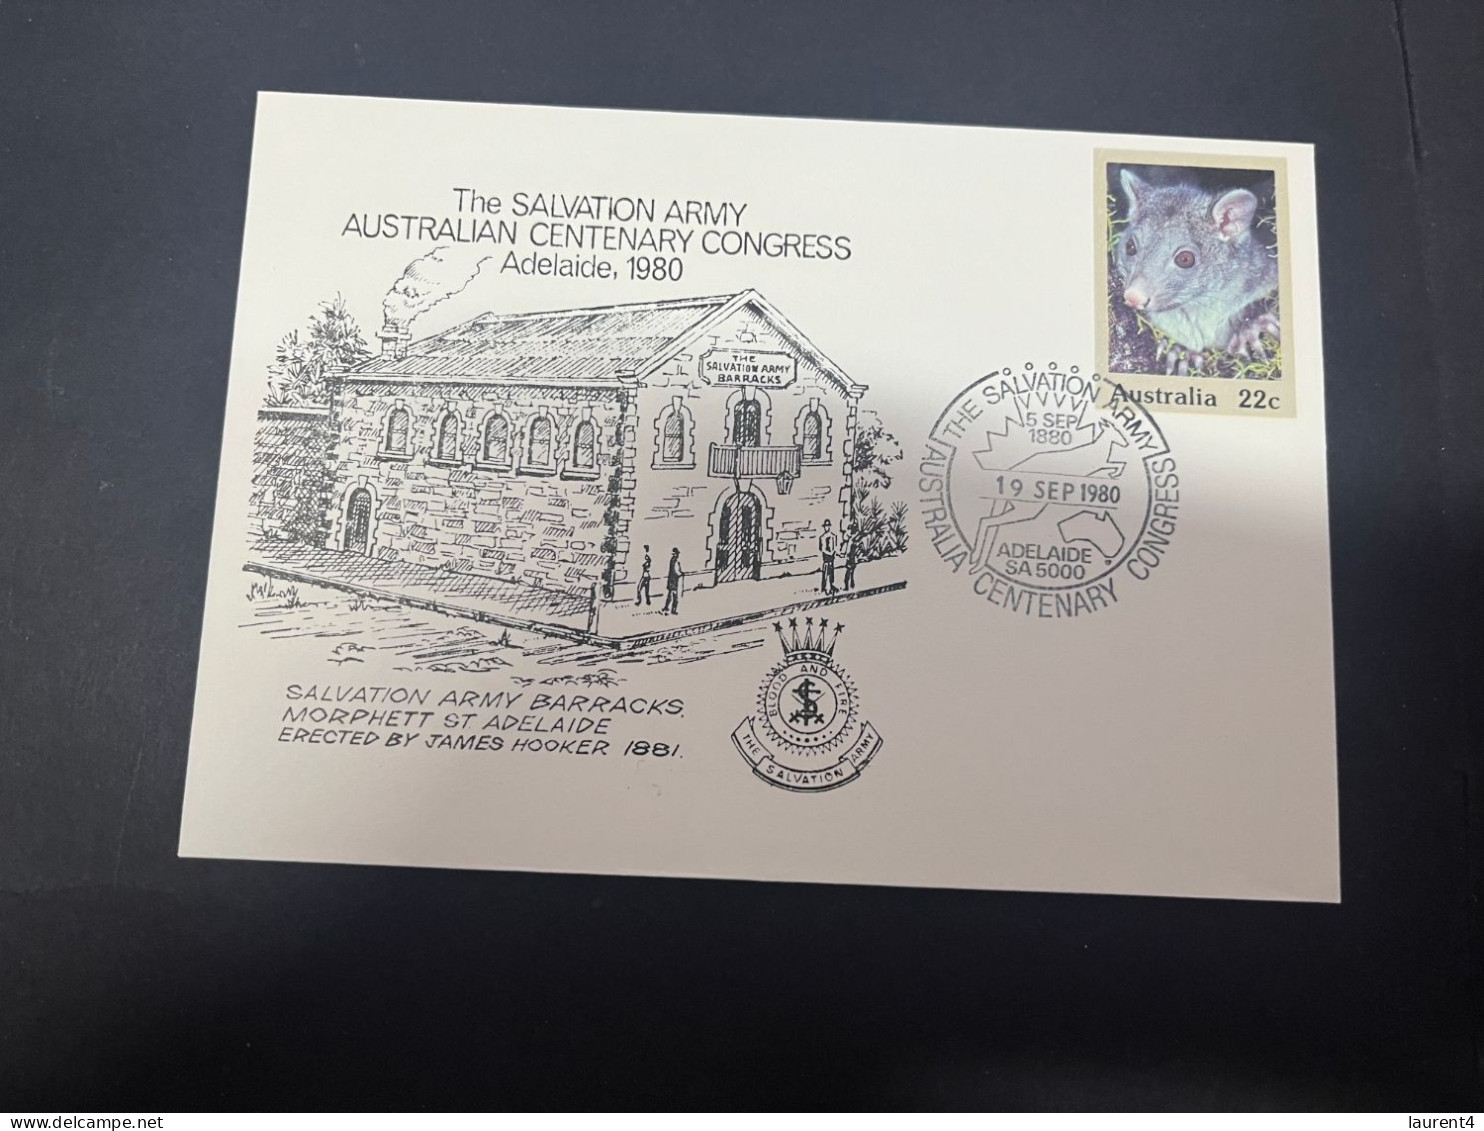 2-5-2024 (3 Z 39) Australia FDC (1 Covers) 1980 - Salvation Army Australian Centenary Congress In Adelaide (Brushtail) - FDC